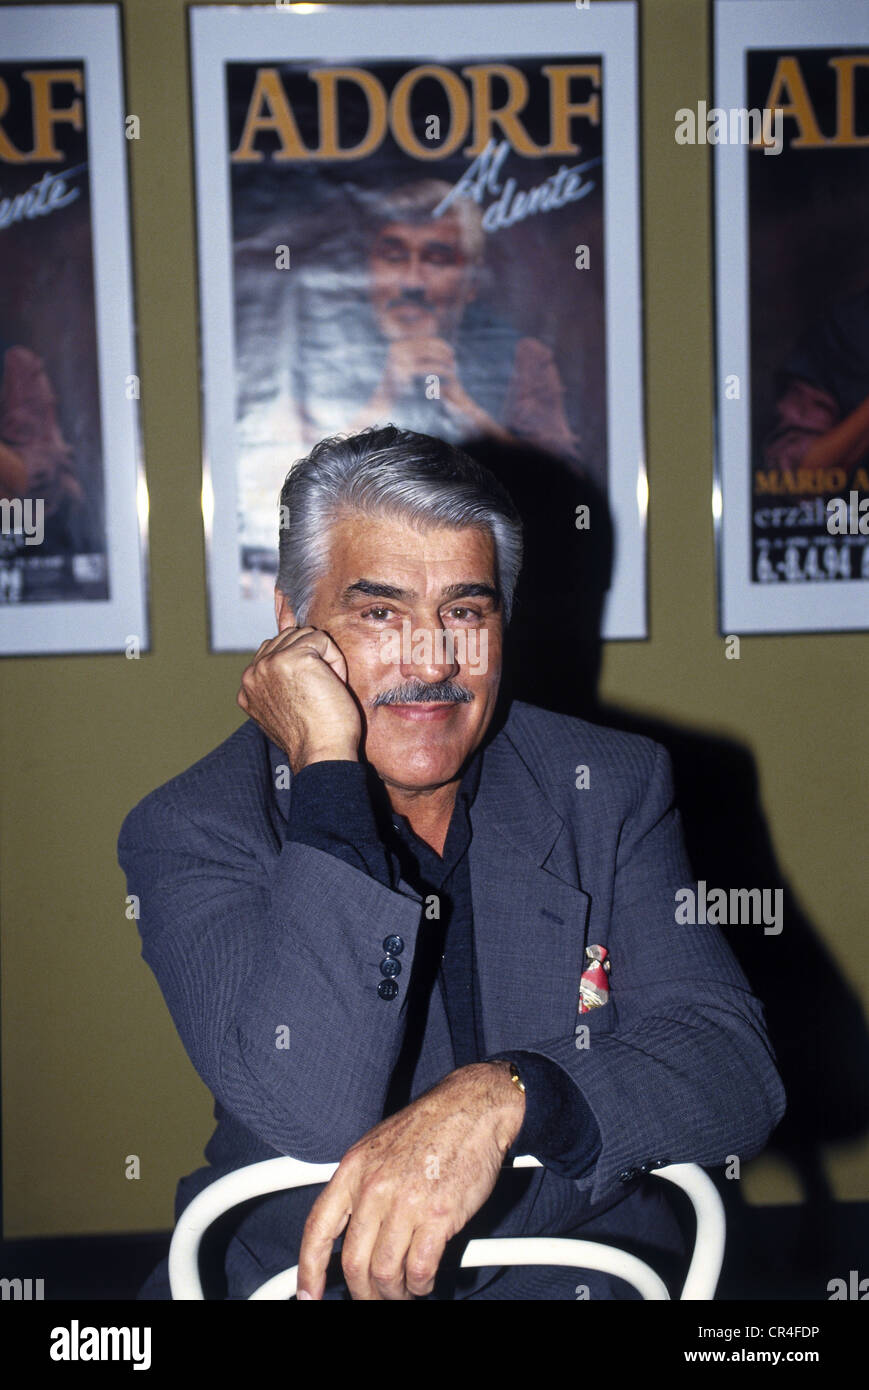 Adorf, Mario  * 8.9.1930, German actor, half length, at press conference of his show 'Al Dente', Kammerspiele theatre, Munich, 1994, Stock Photo